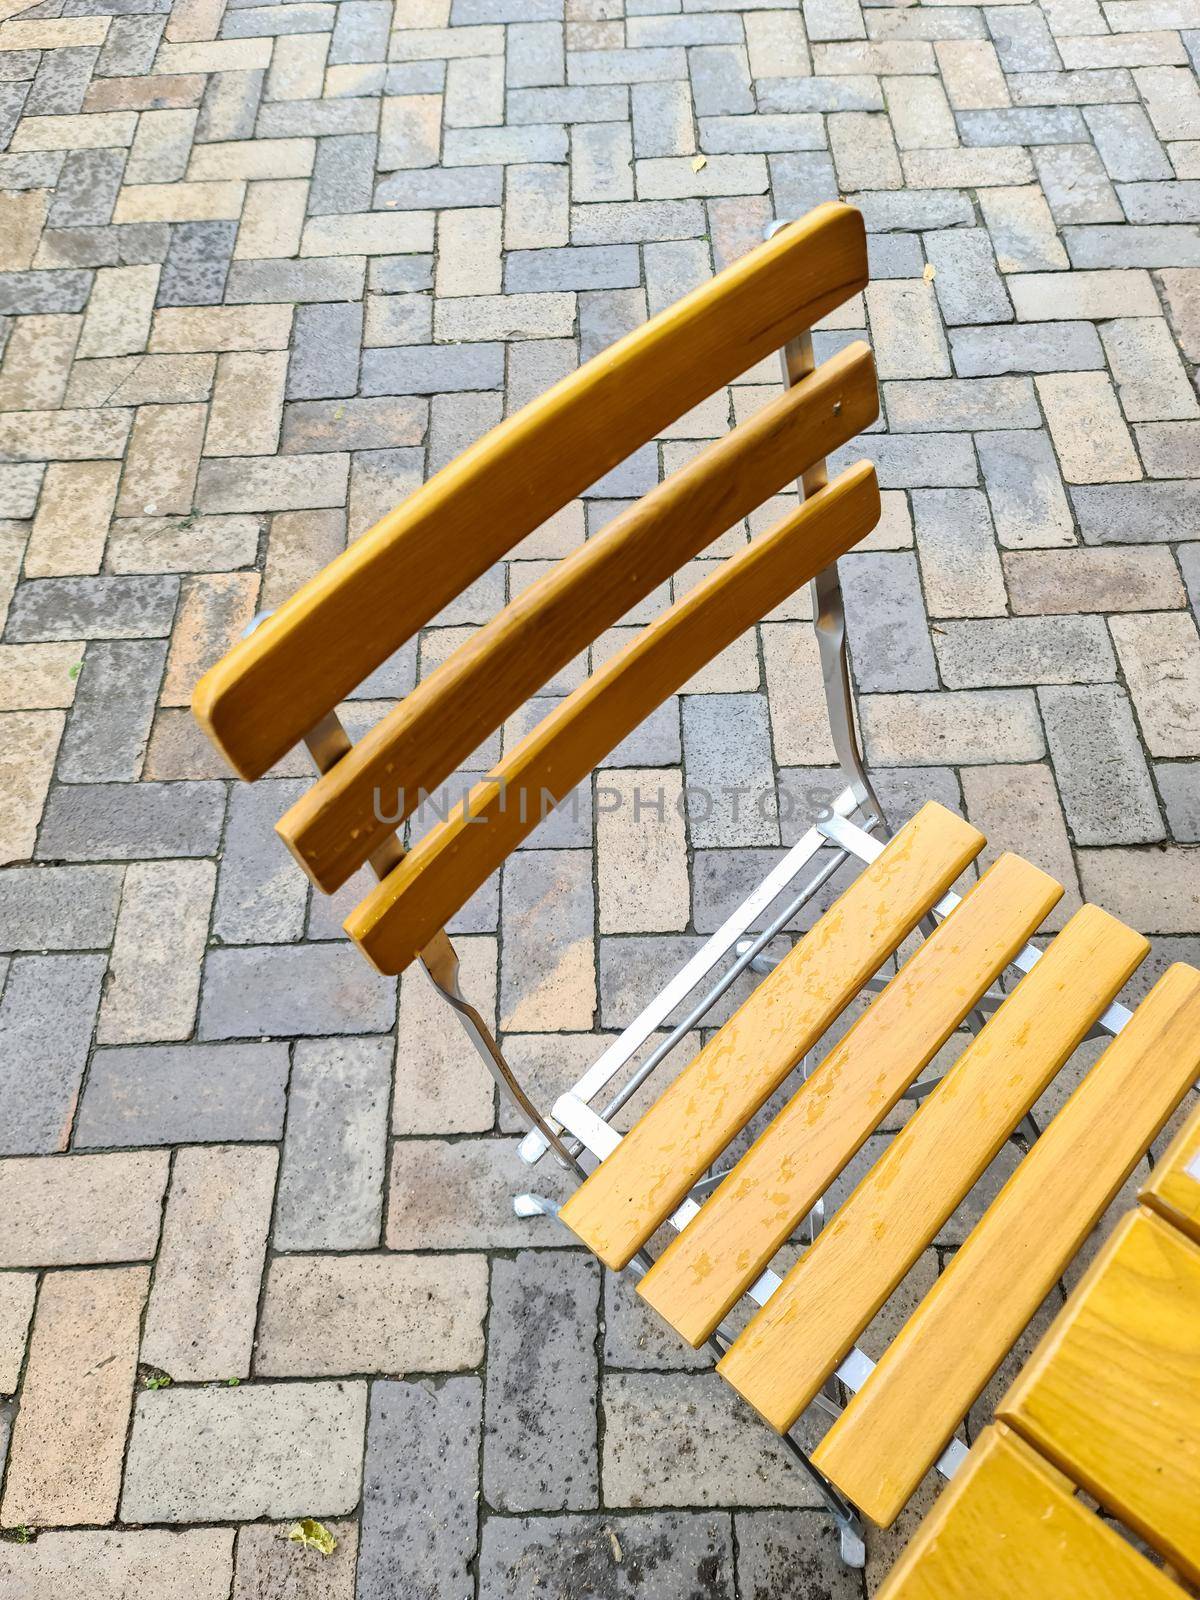 Wooden chairs on a cobblestone sideway in front of a restaurant. High angle view.